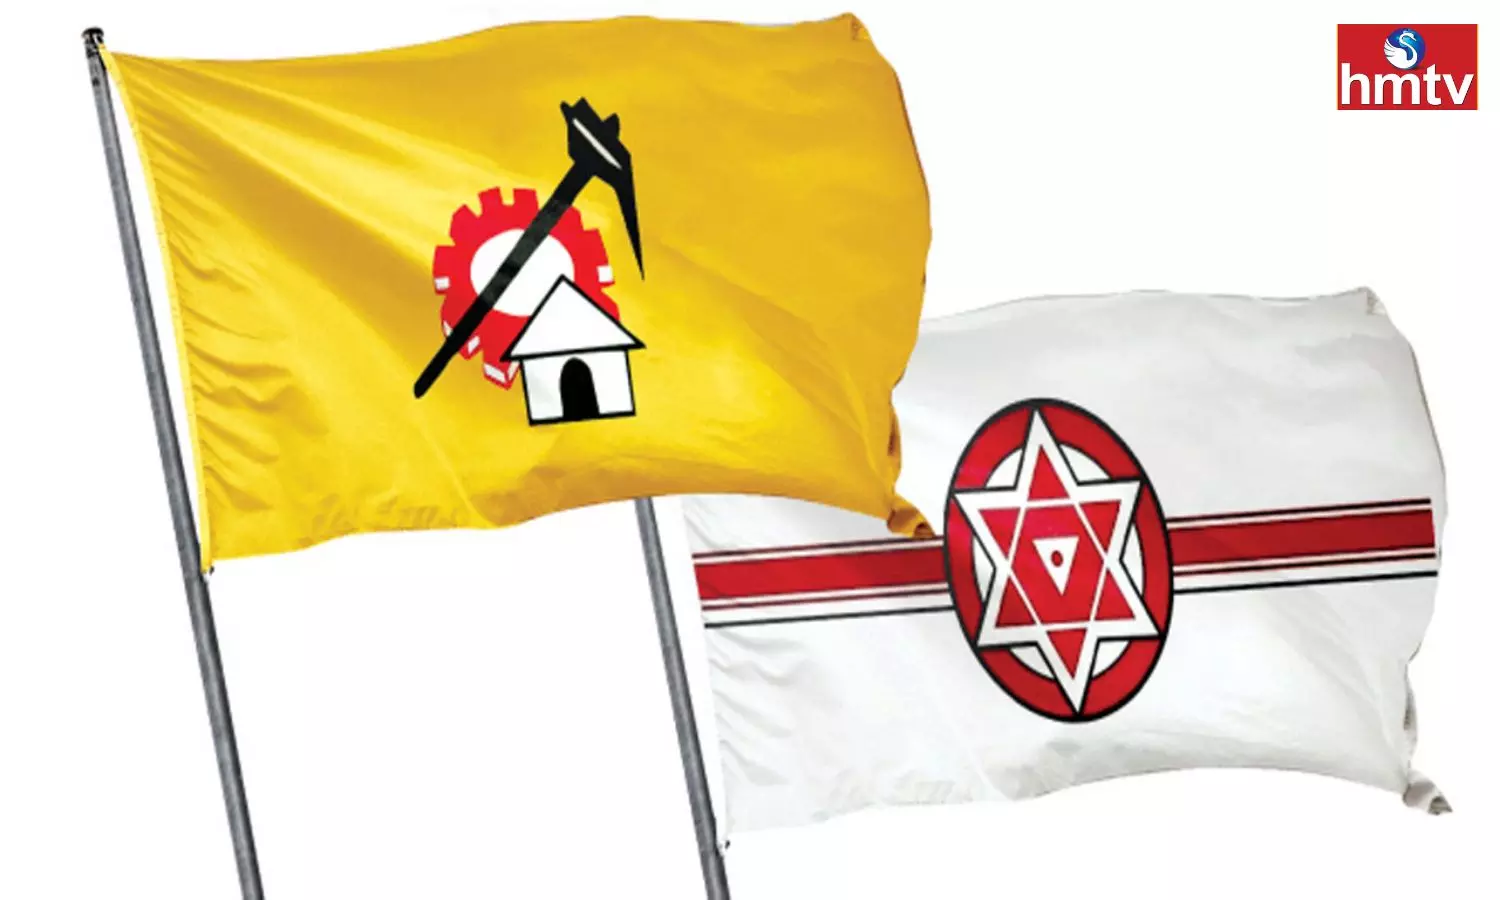 Public meeting of TDP and Janasena in Prathipadu on 28th of this month